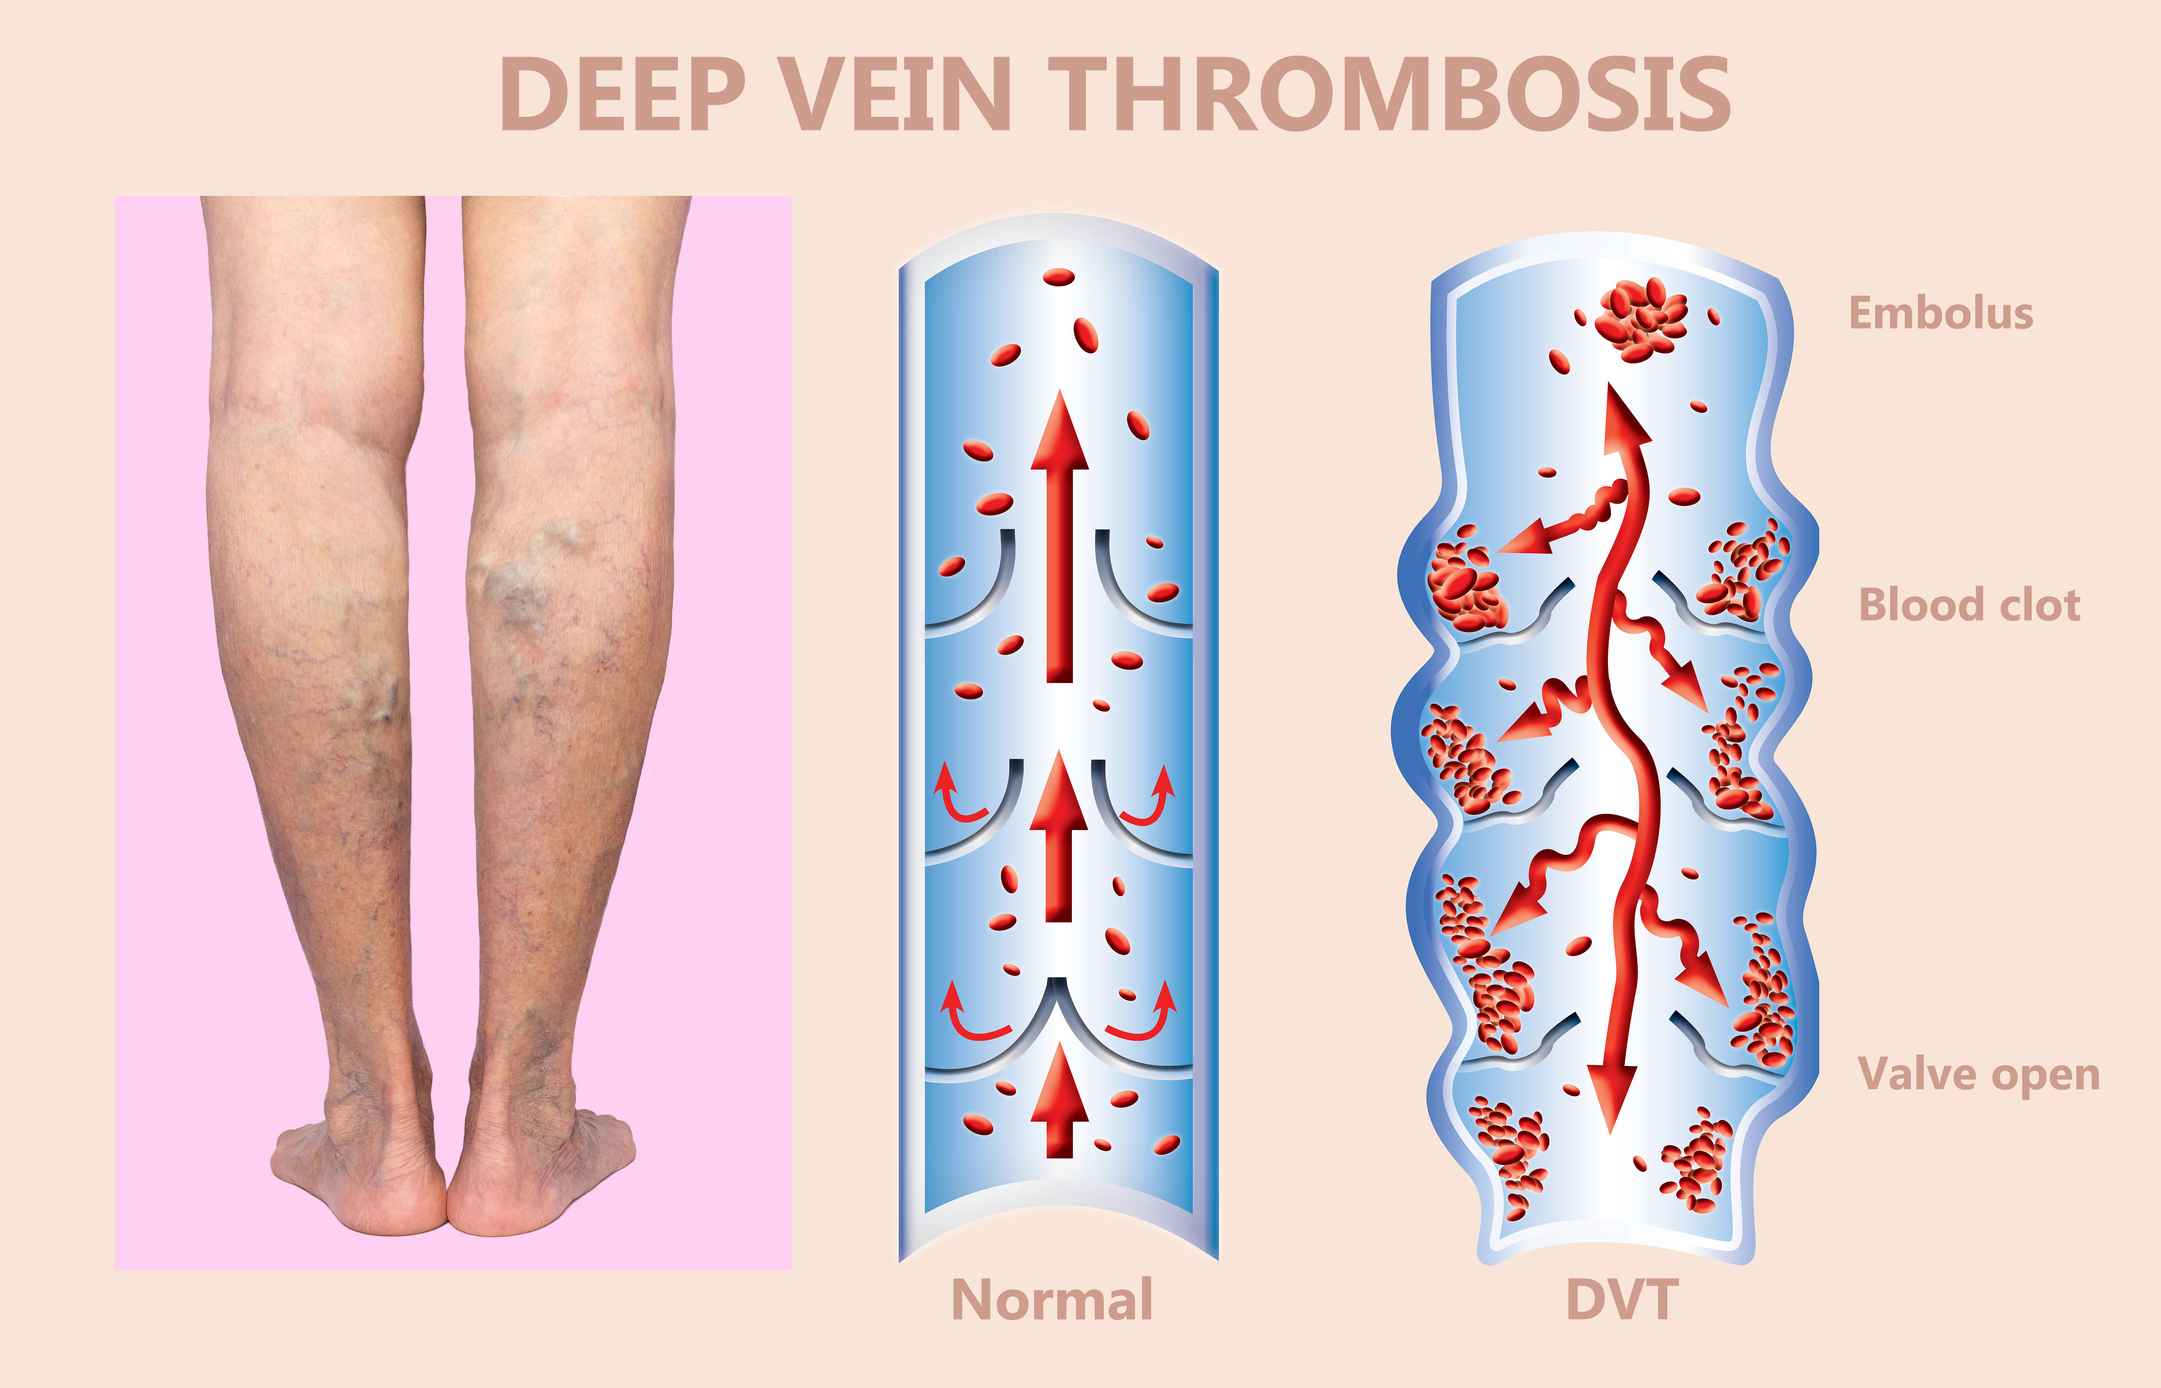 March is Deep Vein Thrombosis Awareness Month - FAQs on DVT